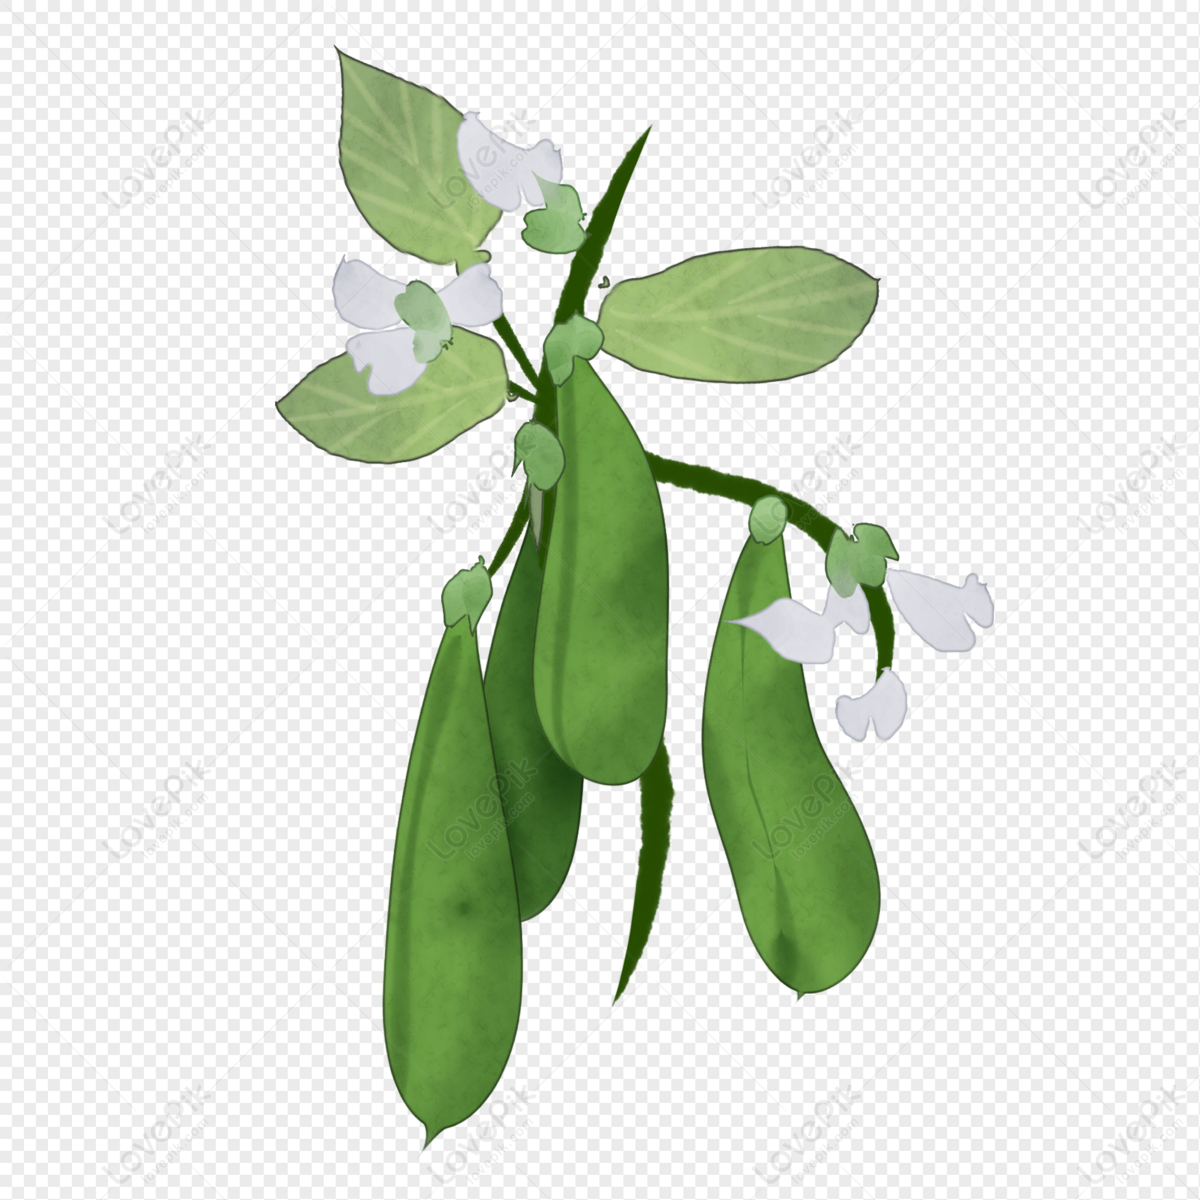 Pea Plant Cliparts, Stock Vector and Royalty Free Pea Plant Illustrations